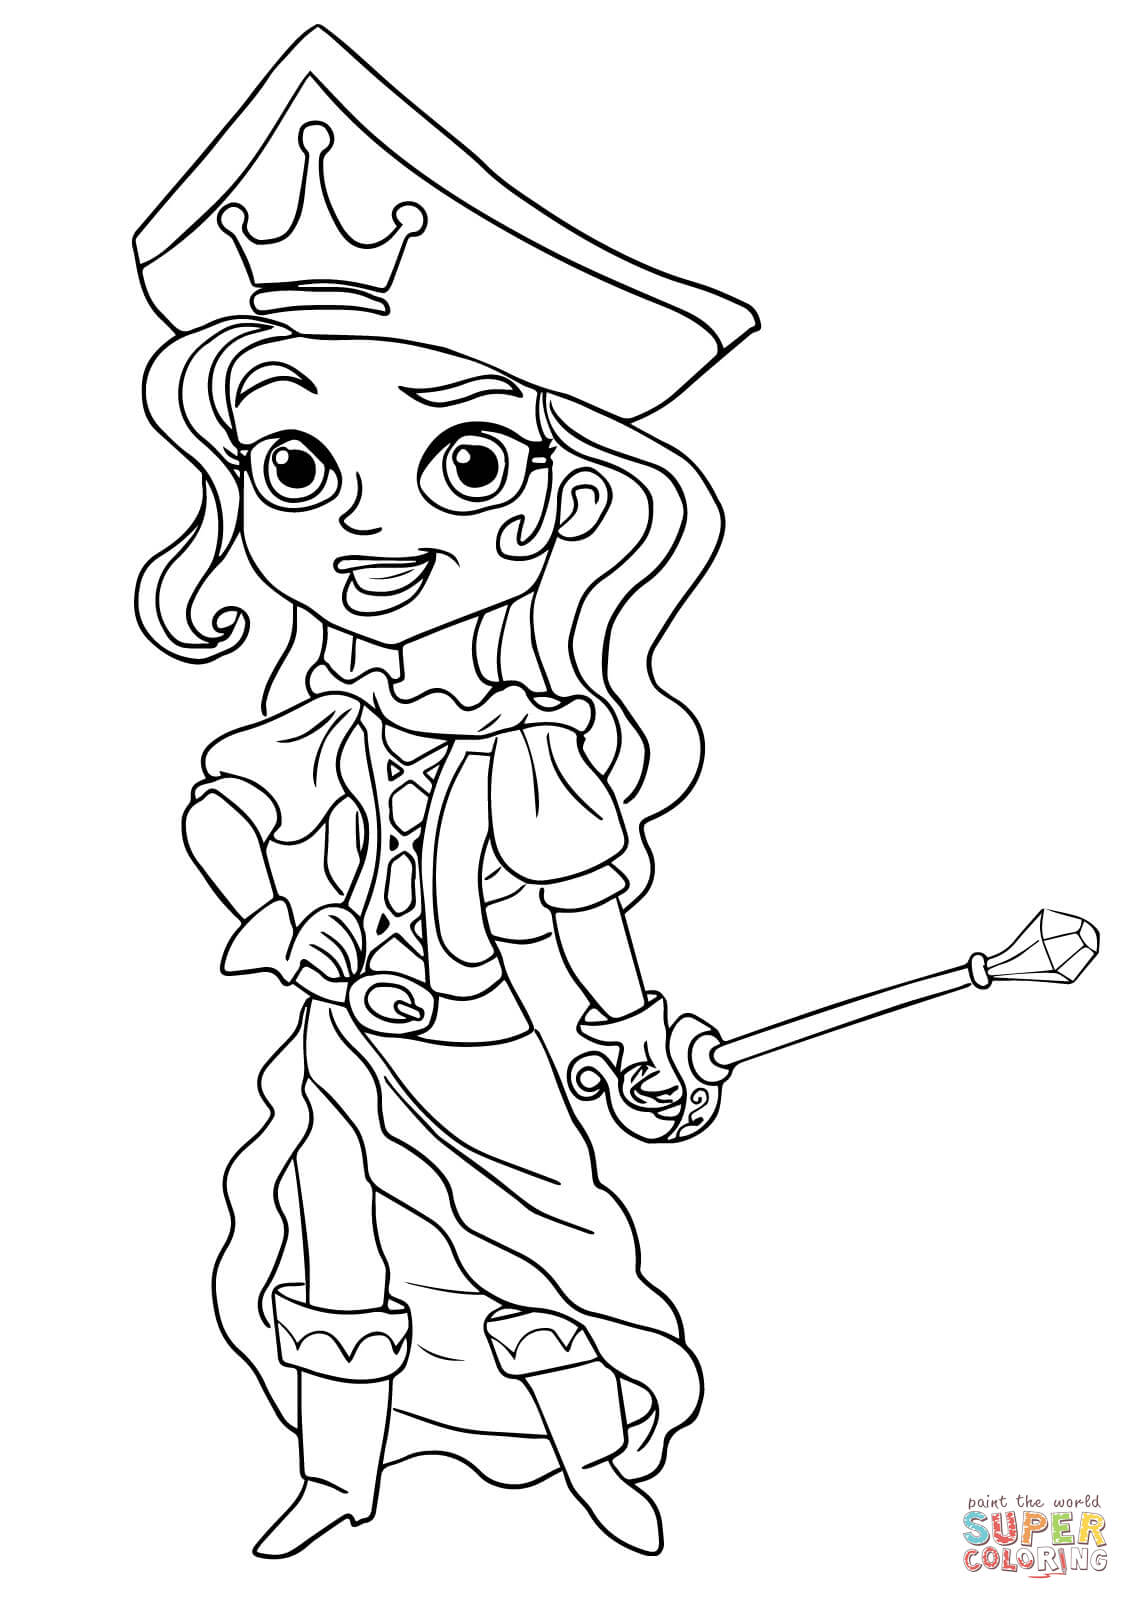 The pirate princess coloring page free printable coloring pages